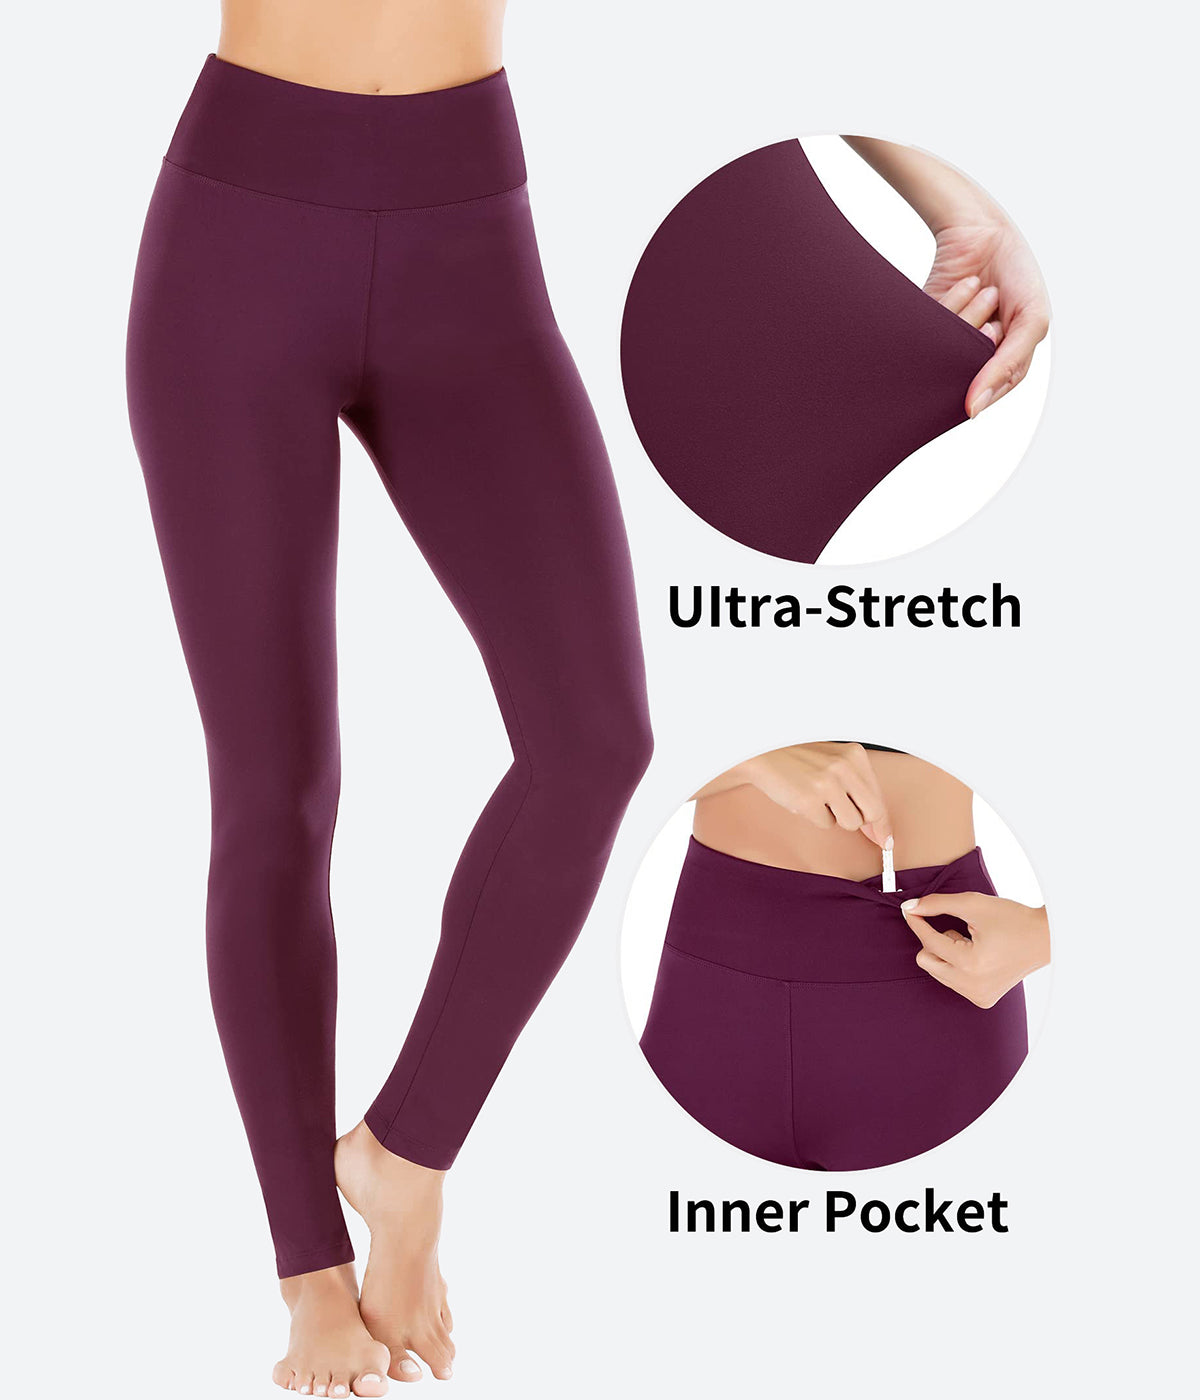 Heathyoga Women's Yoga Pants with Pockets for Nepal